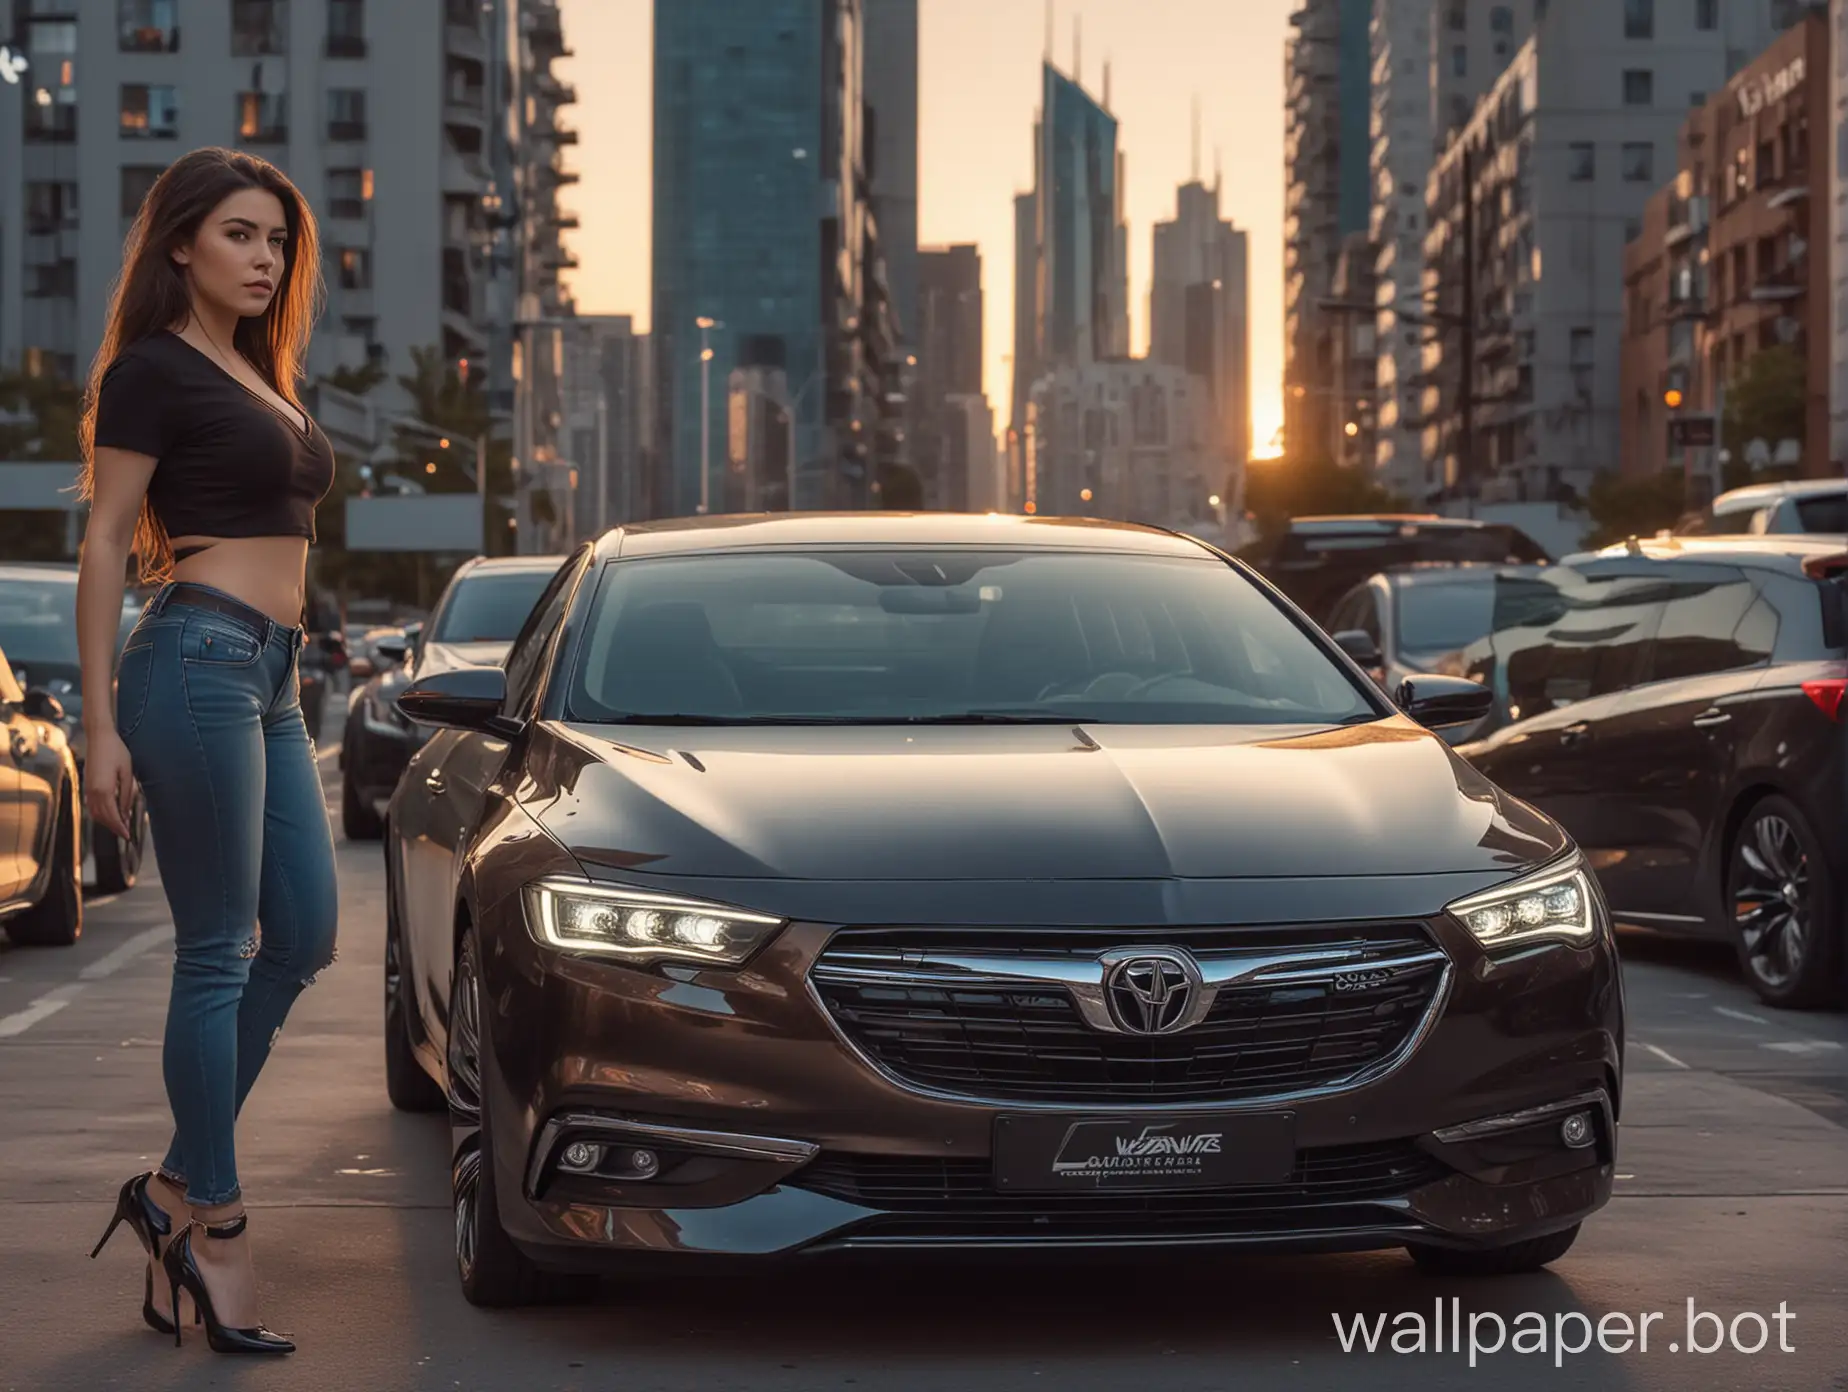 Curvy-Woman-with-Dark-Hair-and-Opel-GrandSport-in-Futuristic-City-at-Sunset